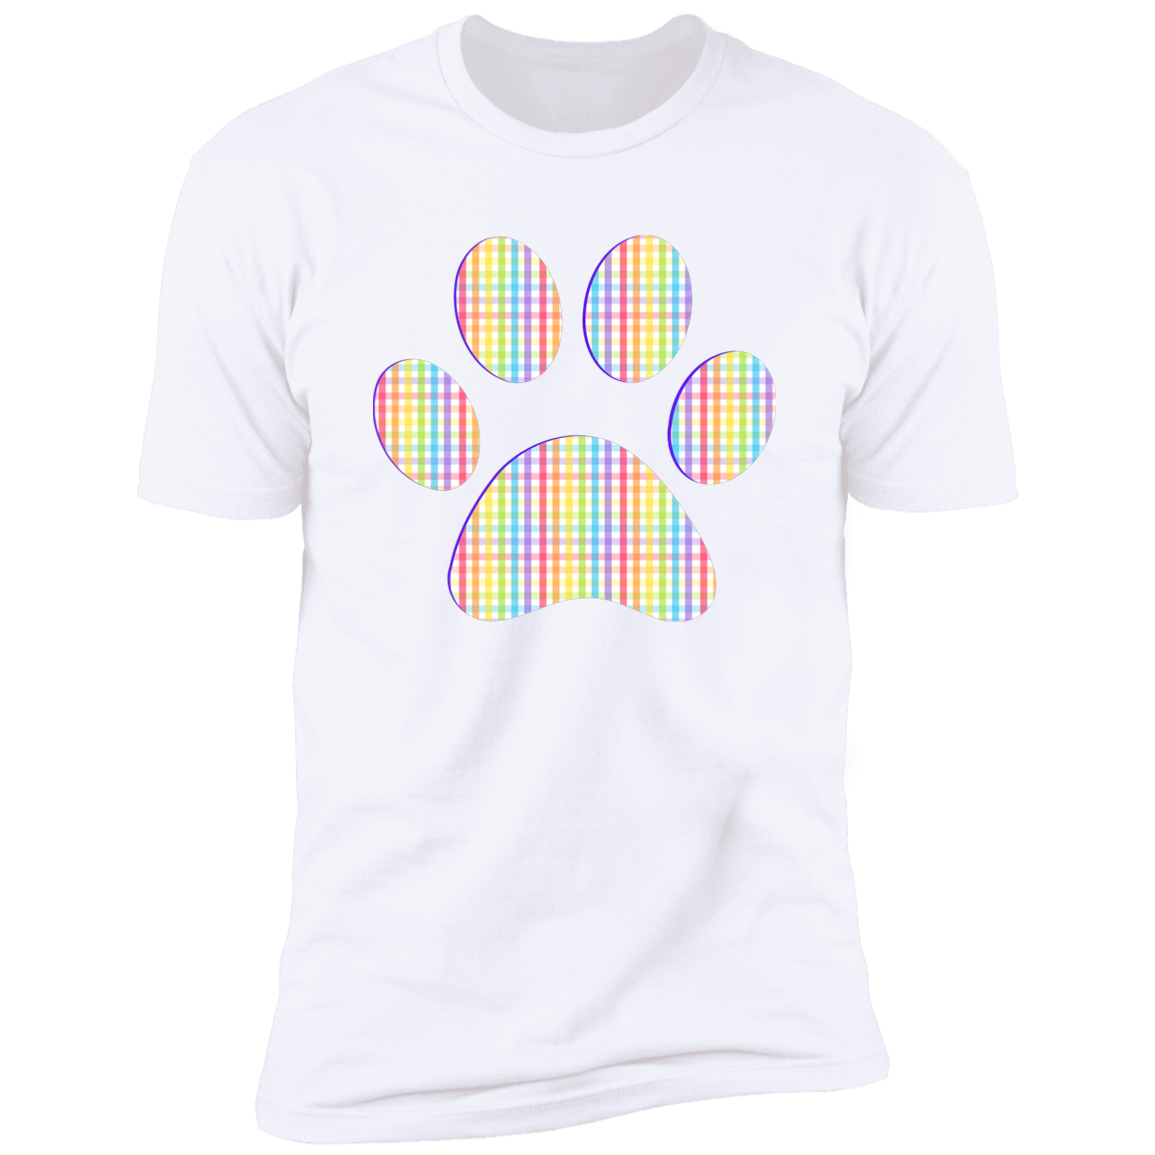 Pride Paw (Gingham) Pride T-shirt, Paw Pride Dog Shirt for humans, in white